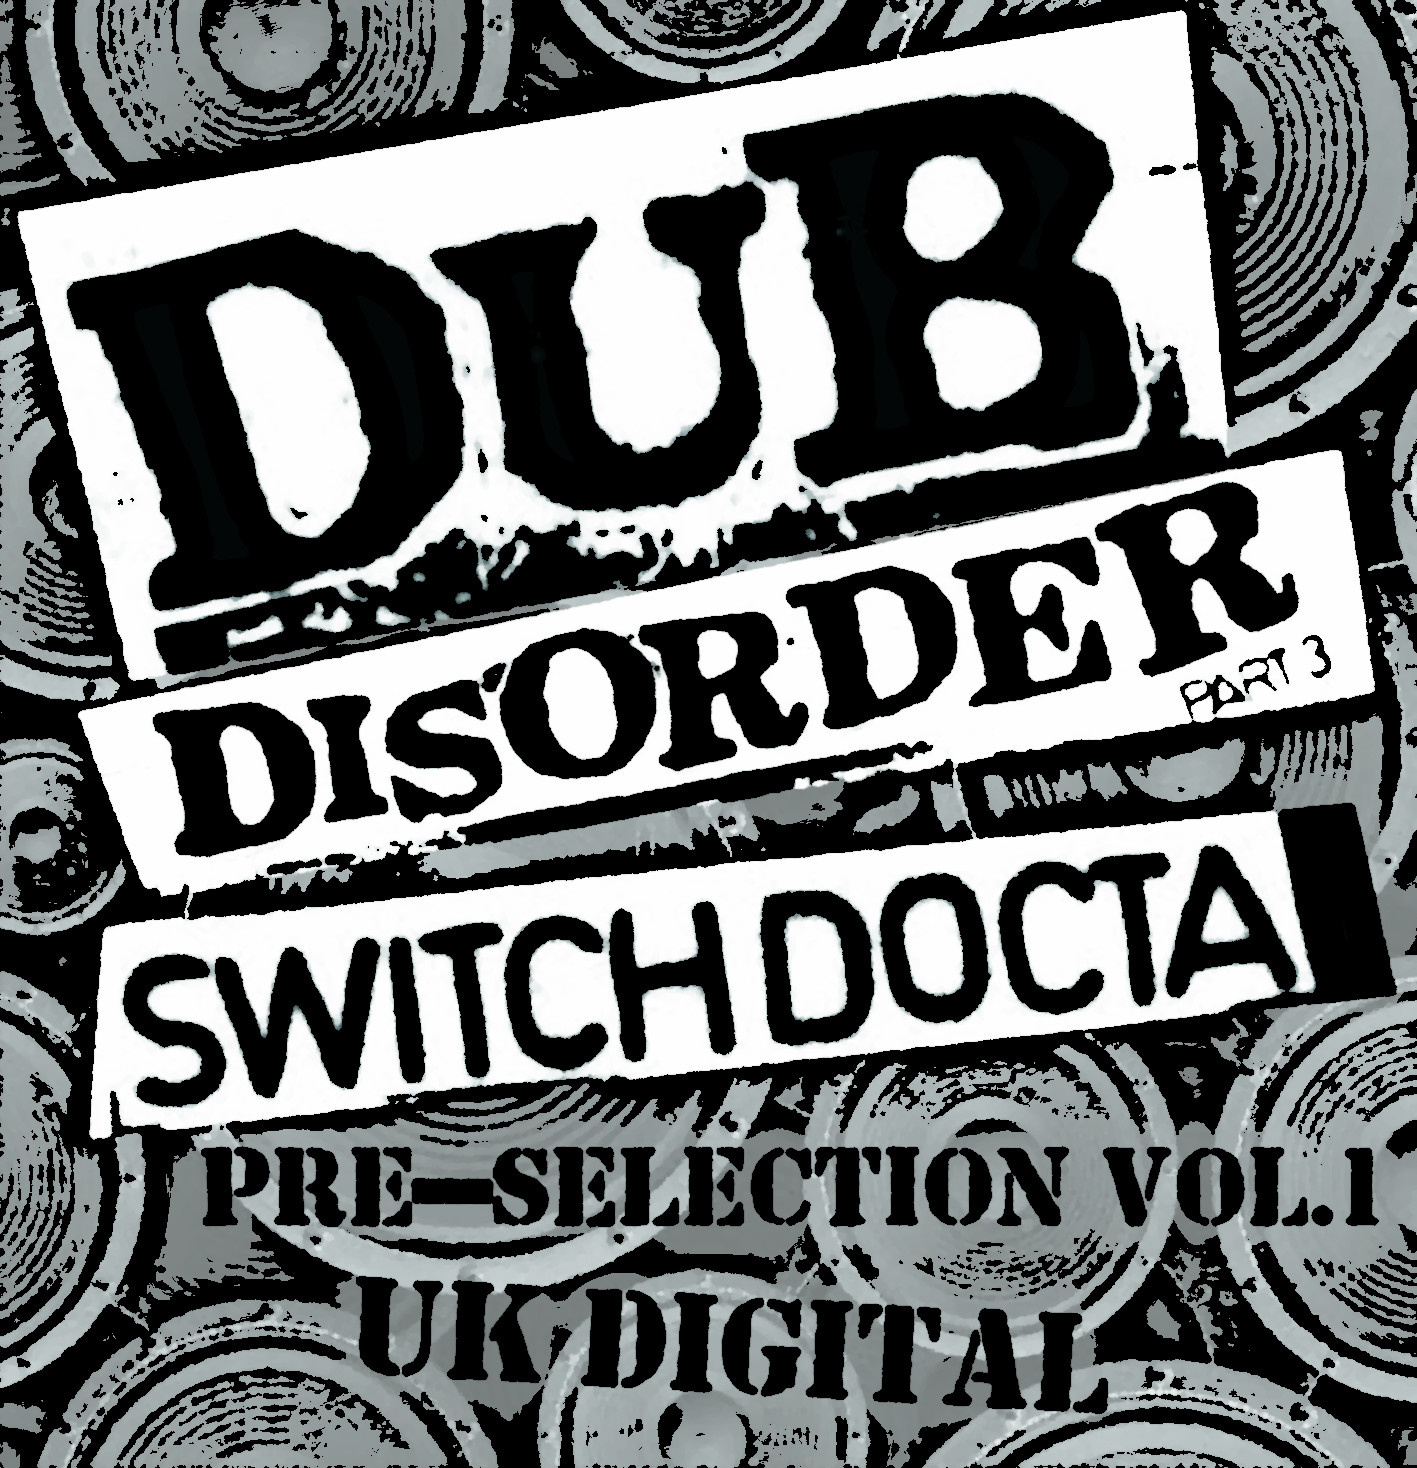 Dub Disorder part 3: the Switch Docta pre-selections Vol. 1 / UK Digital